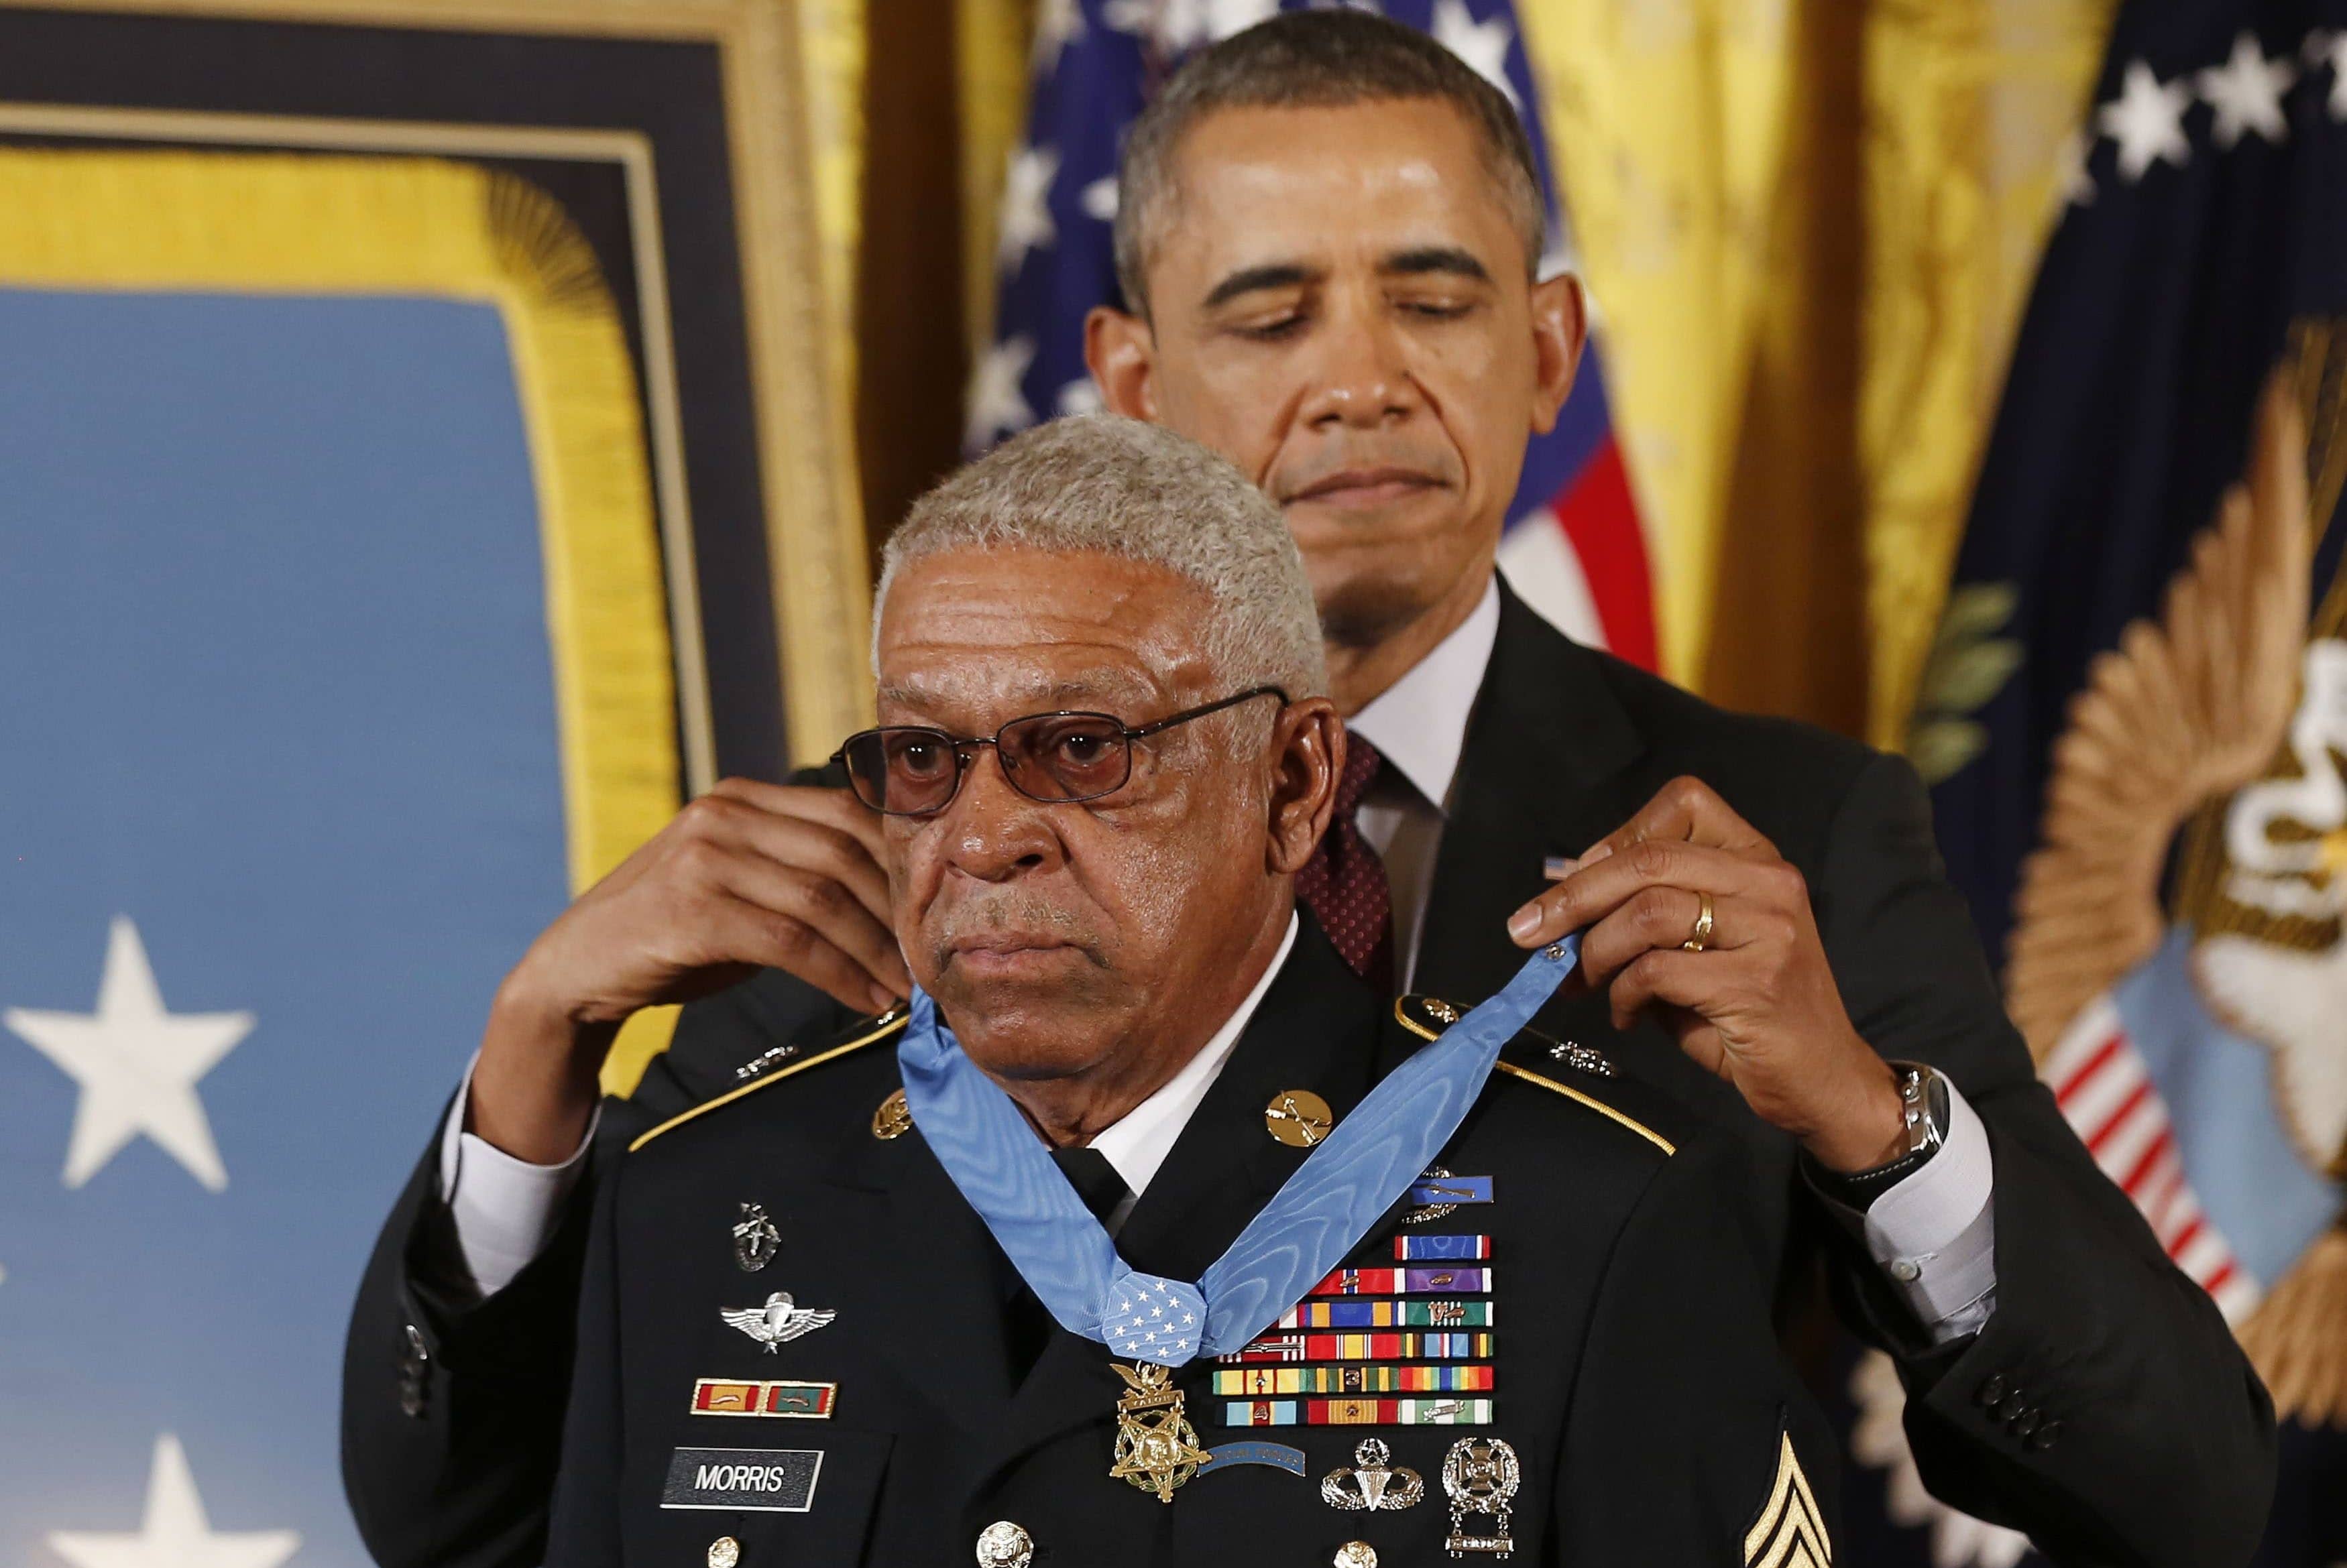 u-s-president-barack-obama-presents-the-medal-of-honor-to-army-staff-sergeant-melvin-morris-for-heroic-action-in-combat-during-the-vietnam-war-while-at-the-white-house-in-washington